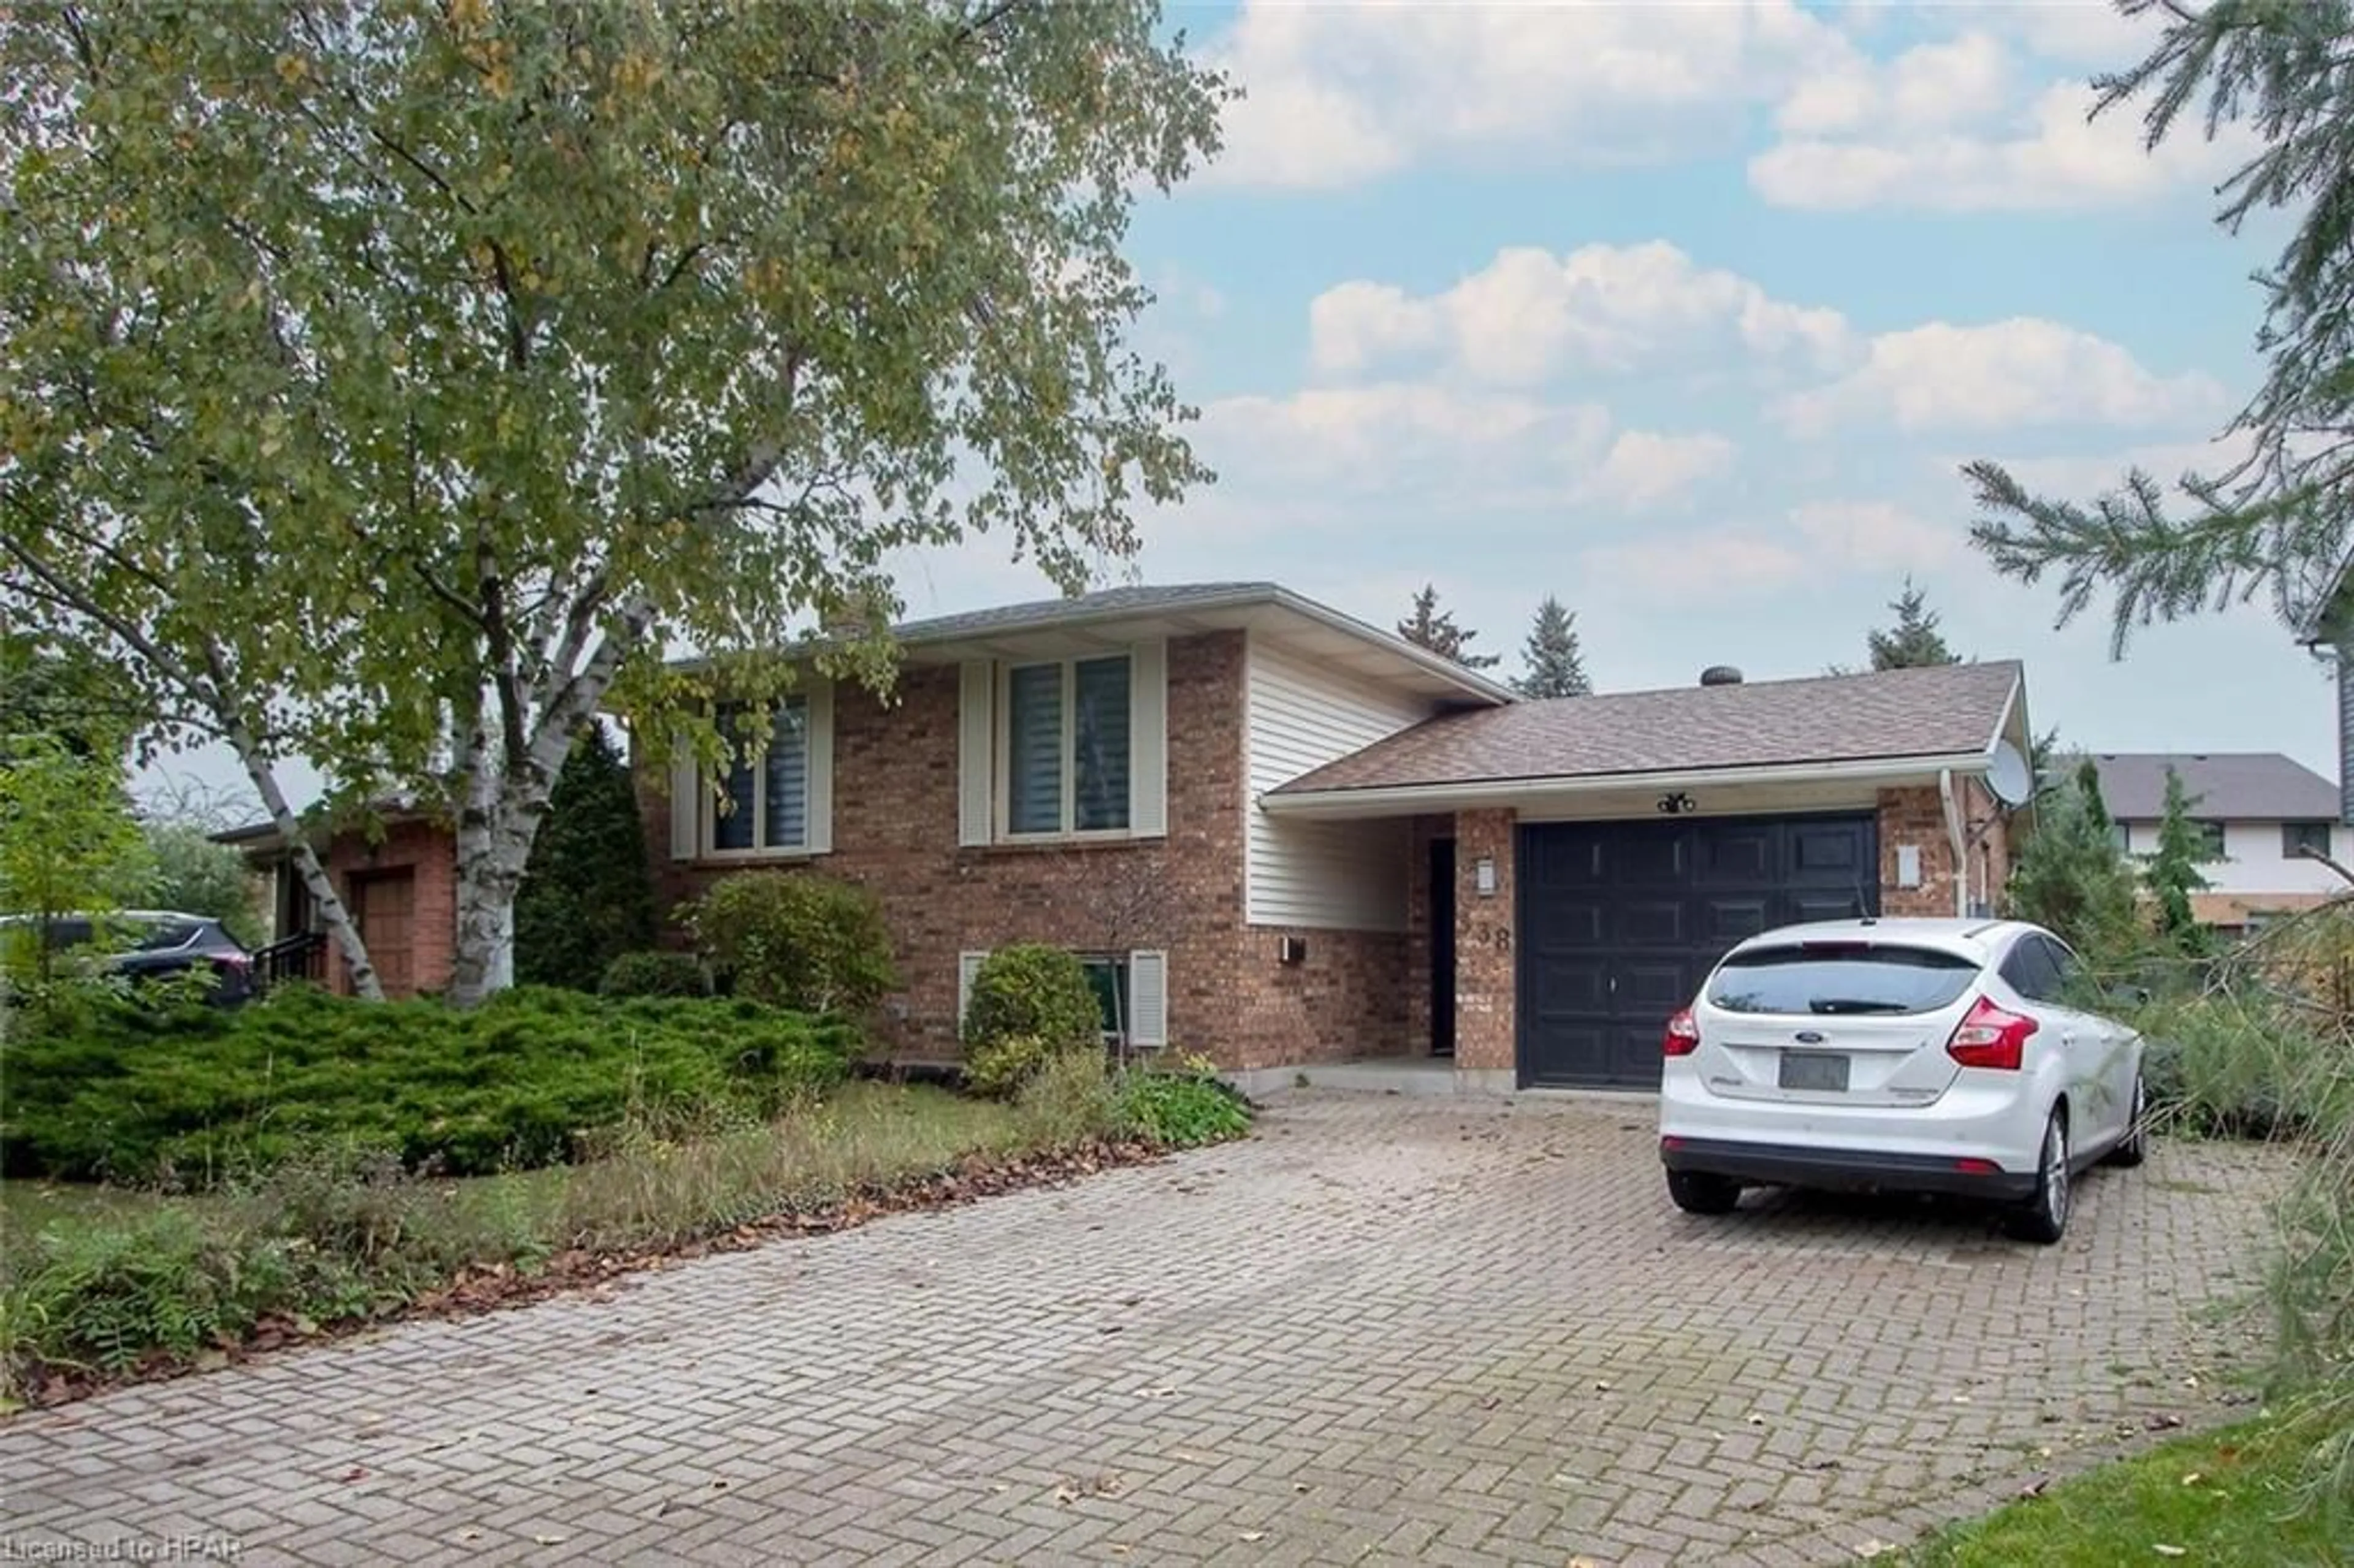 Home with brick exterior material for 338 Greenwood Dr, Stratford Ontario N5A 7R3